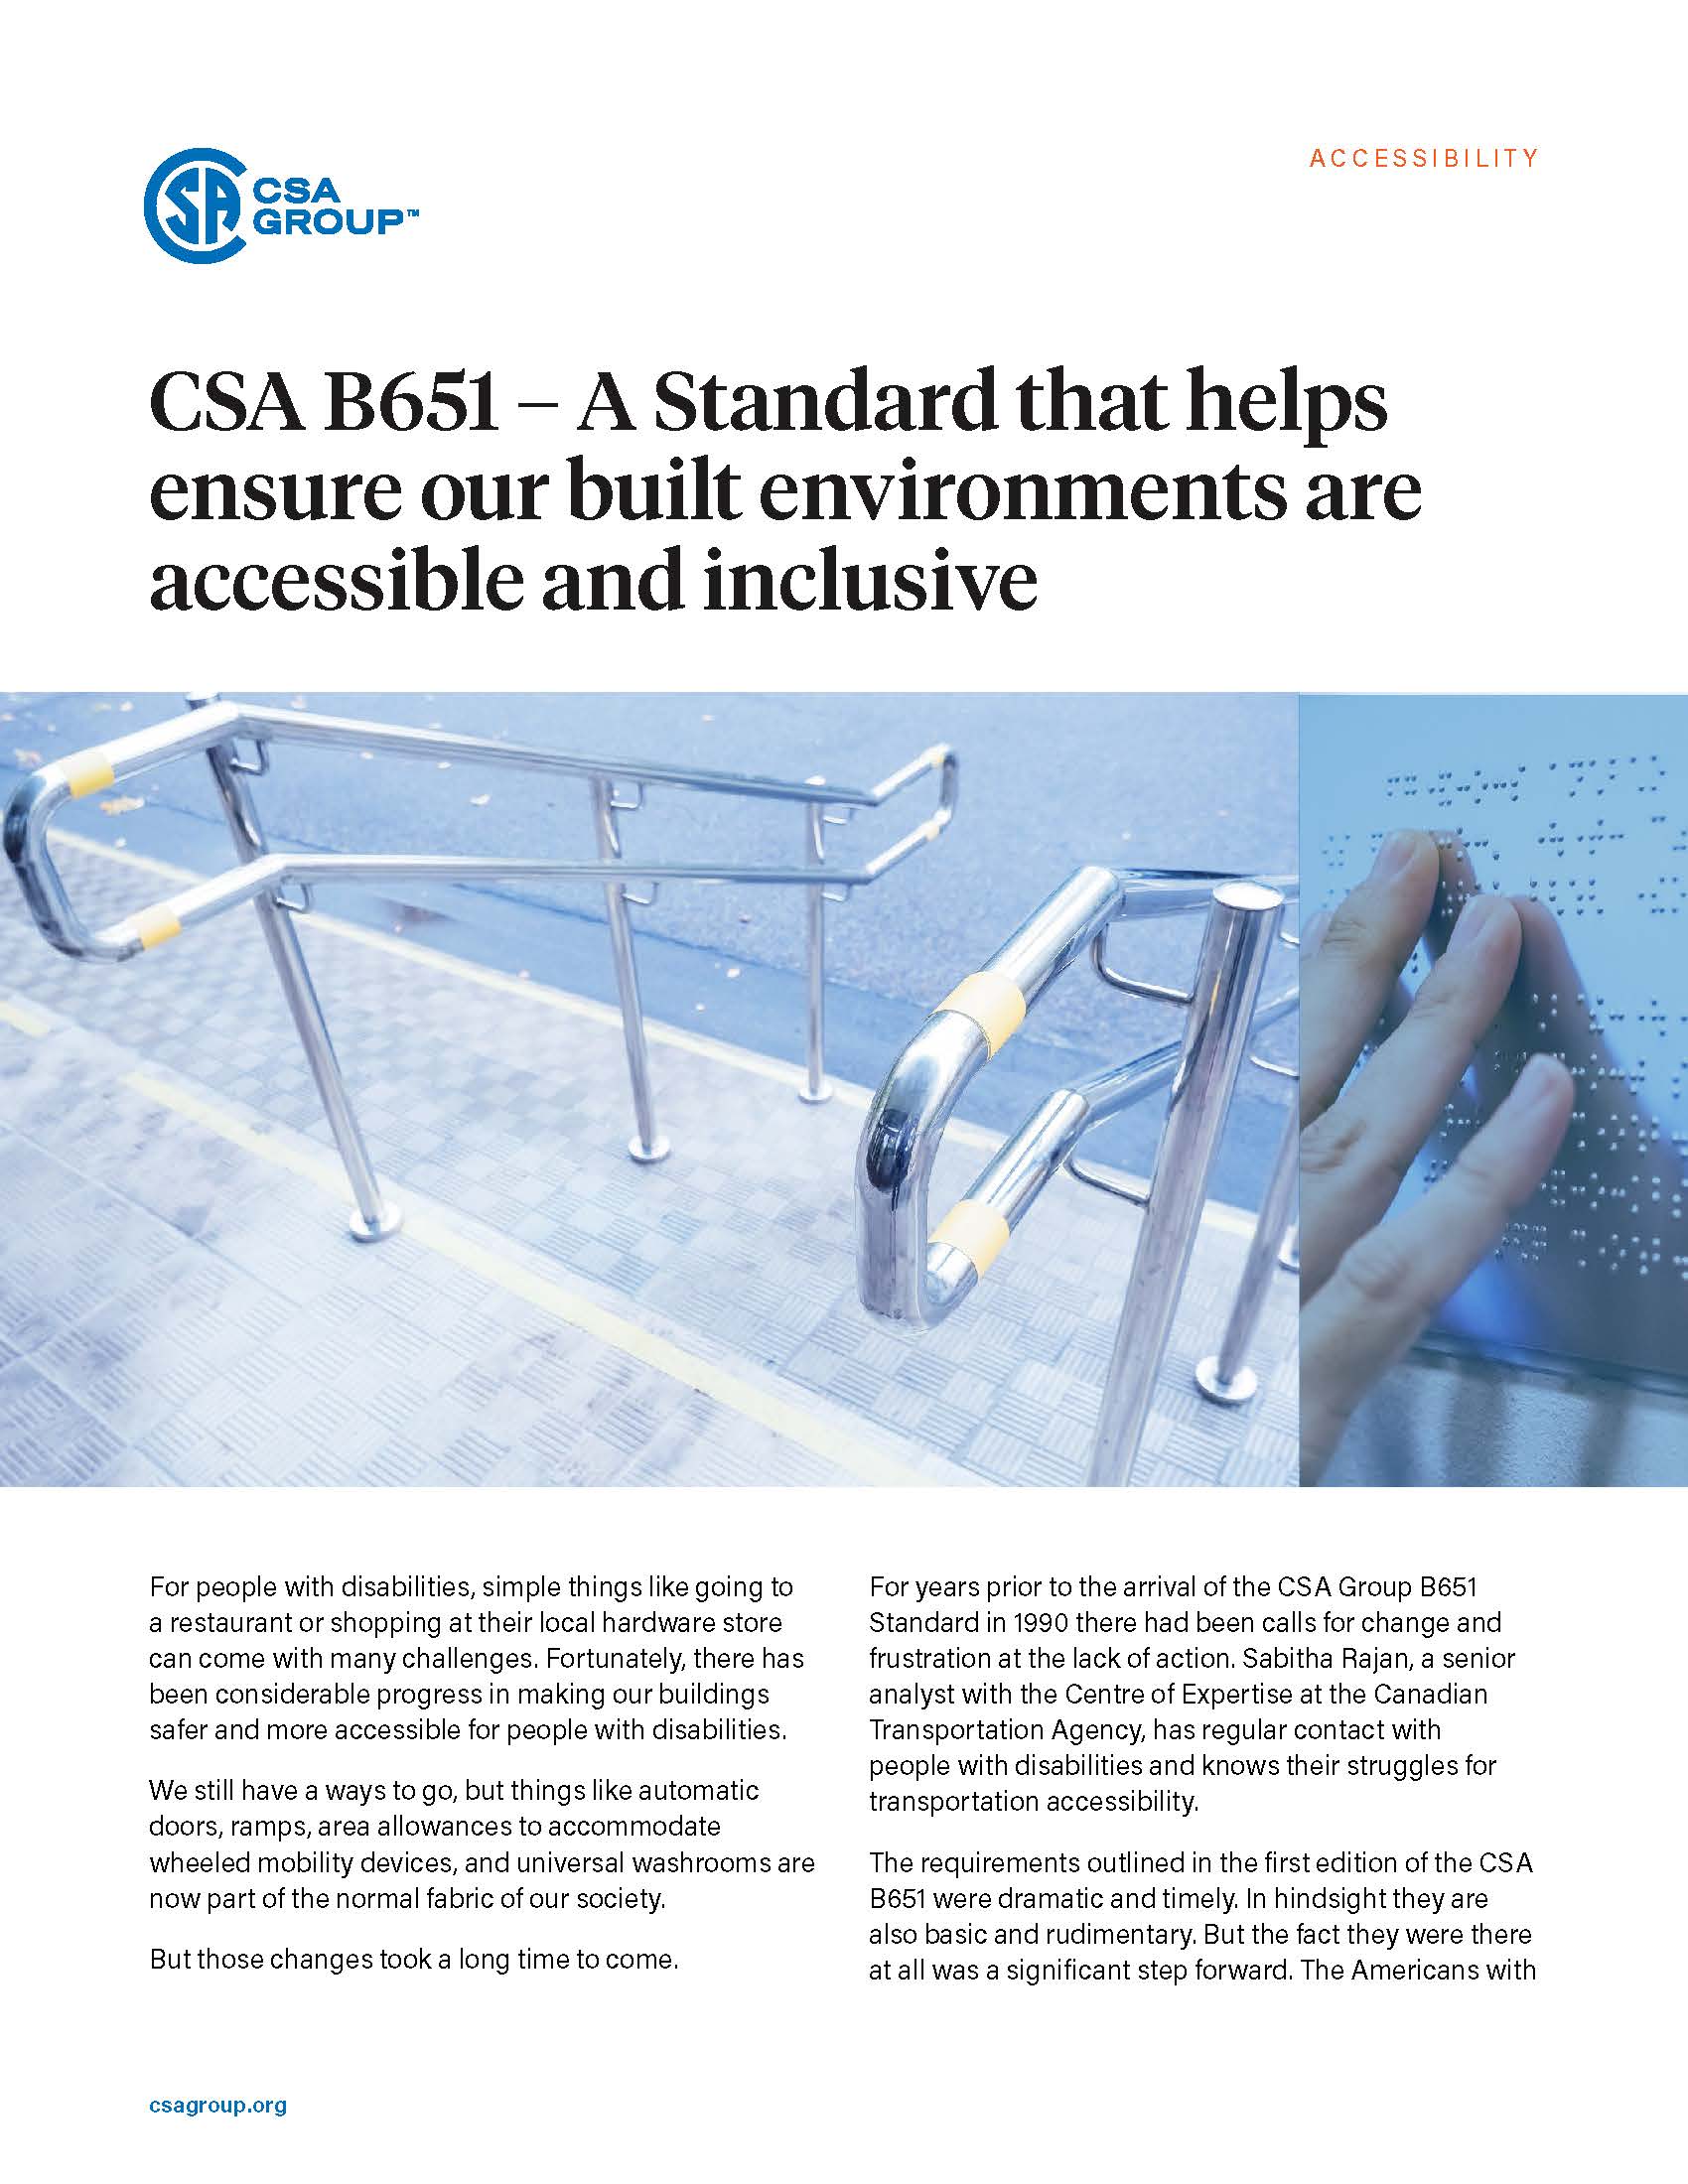 CSA B651: A Standard that helps ensure our built environments are accessible and inclusive